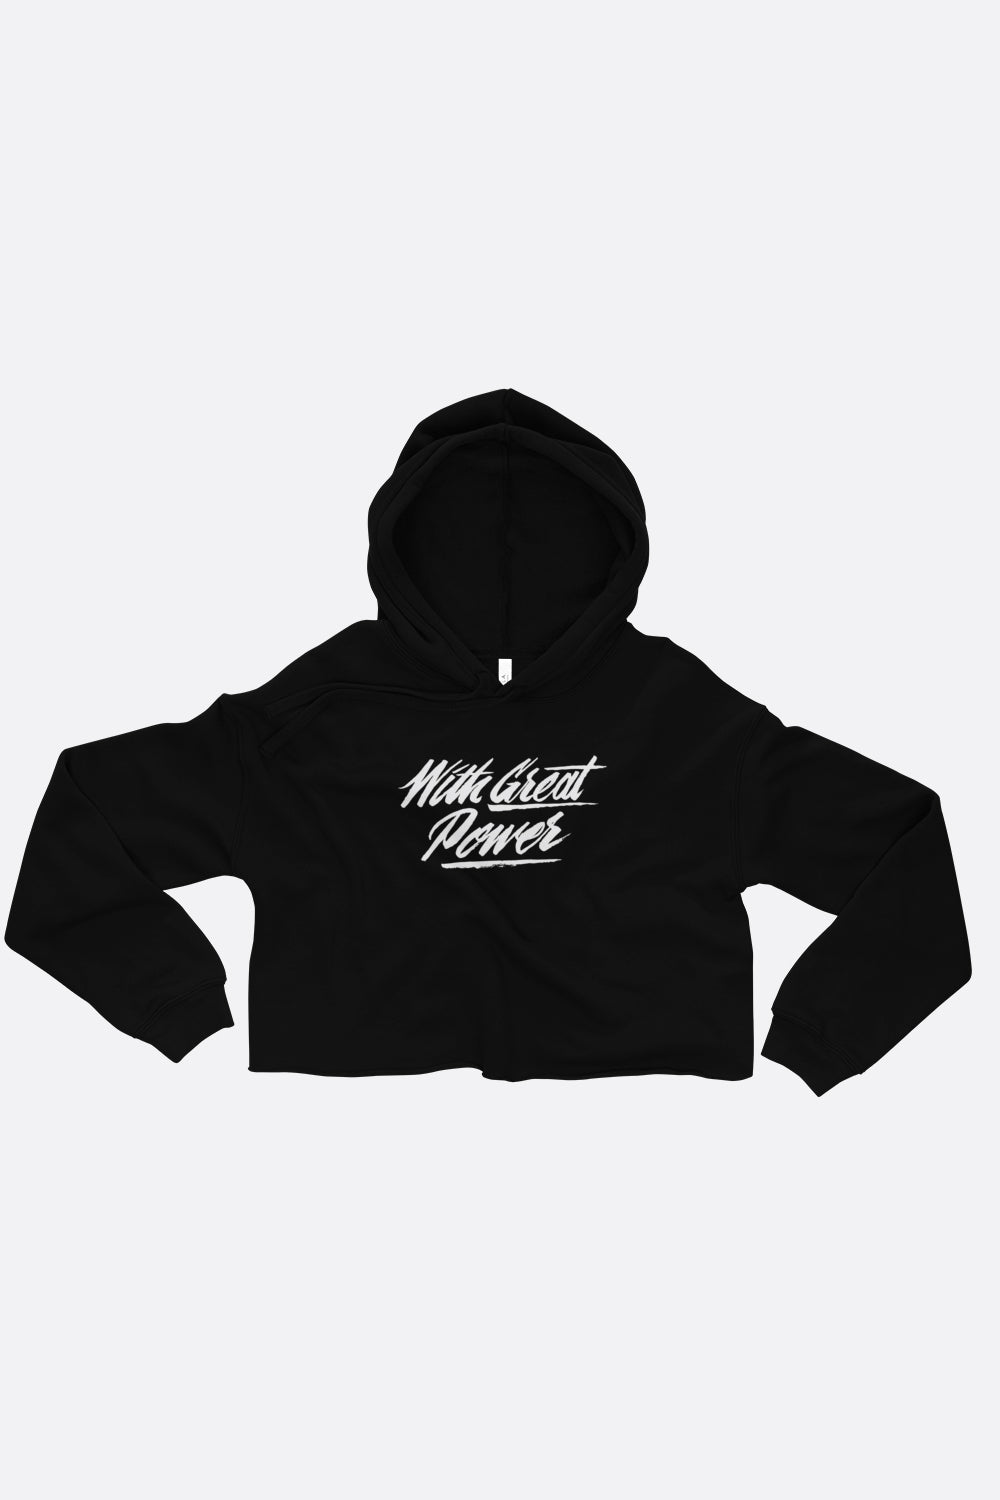 With Great Power Crop Hoodie